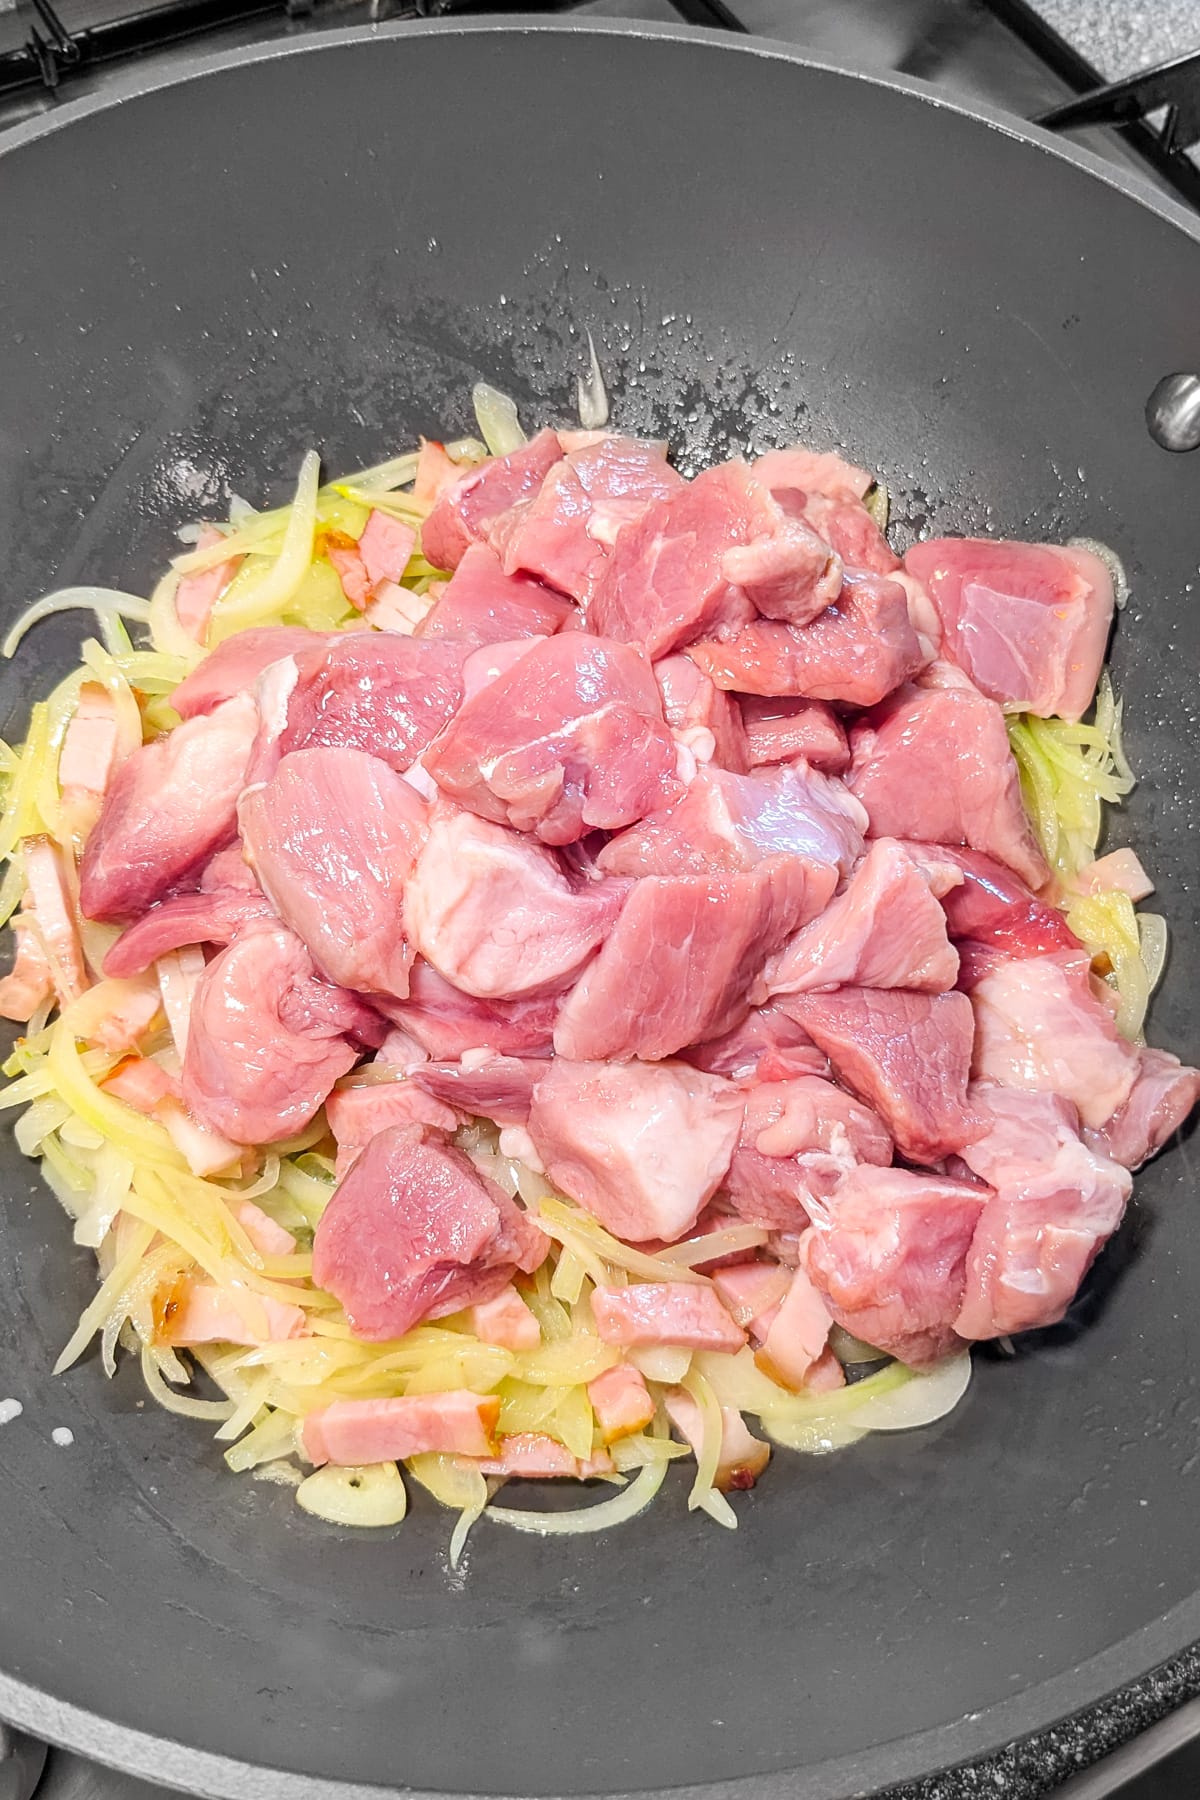 Raw pork meat over a mix of sliced onions and bacon in a wok.